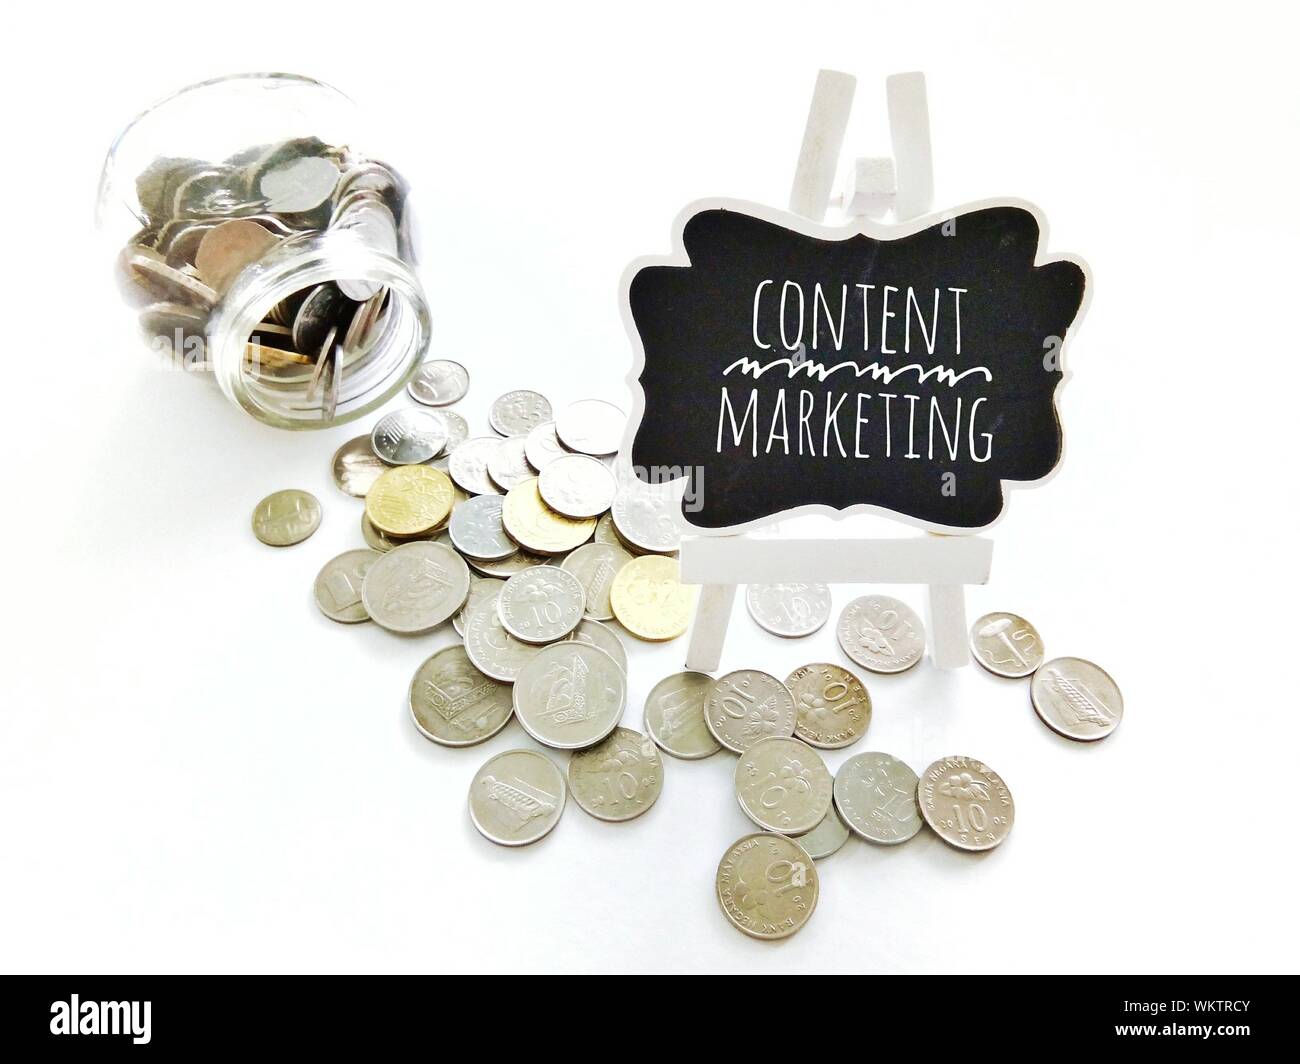 Content Marketing Text With Coins On White Background Stock Photo